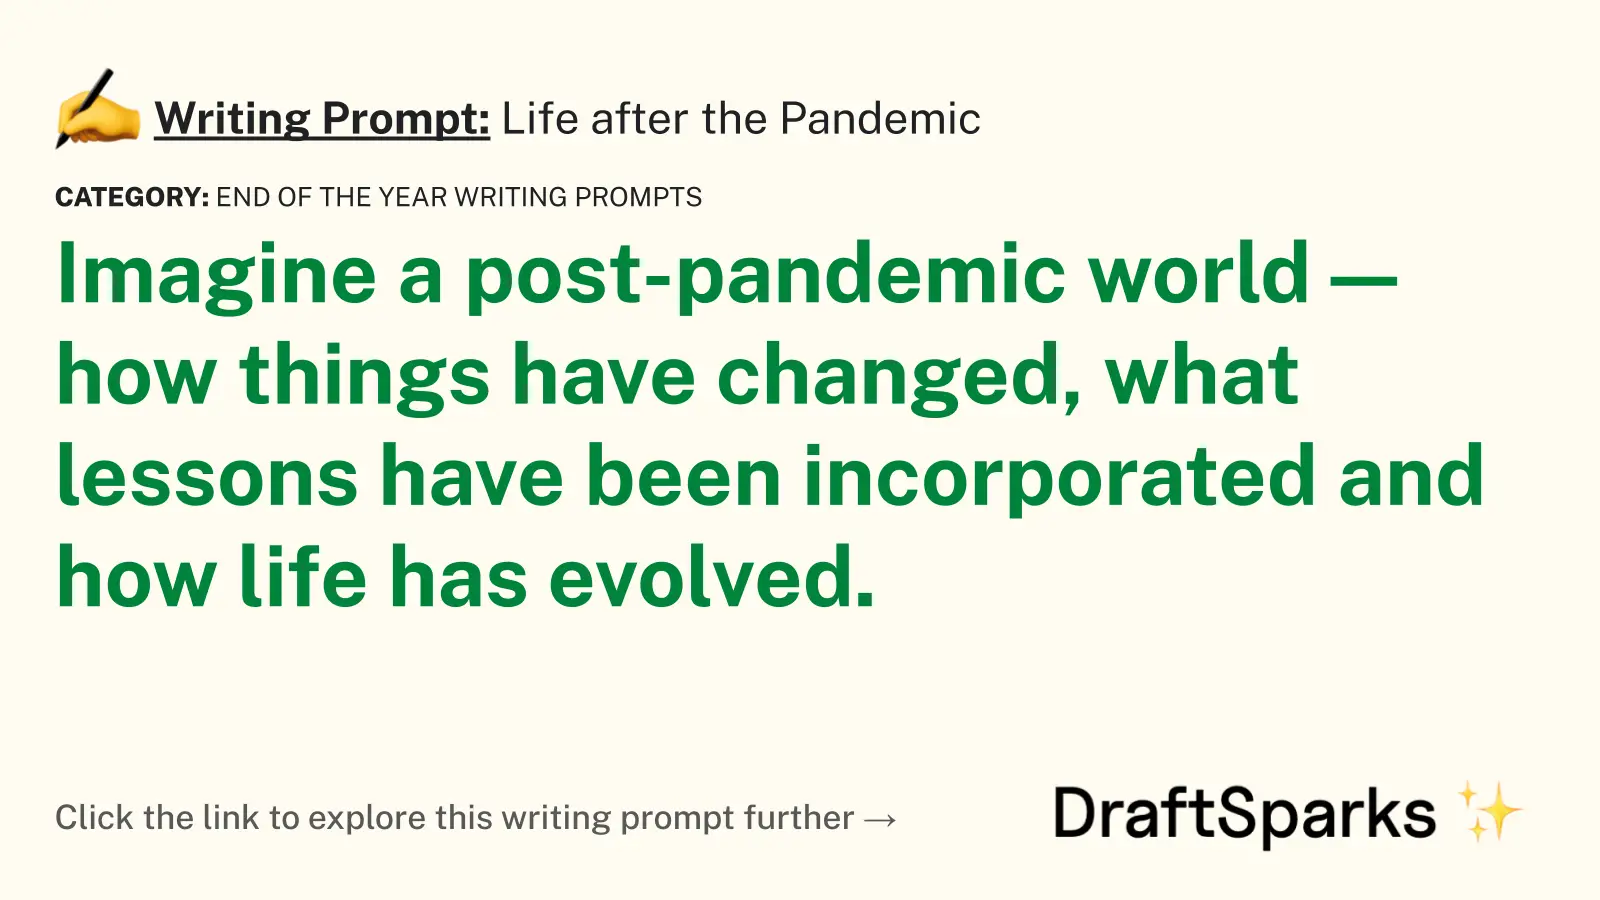 Life after the Pandemic